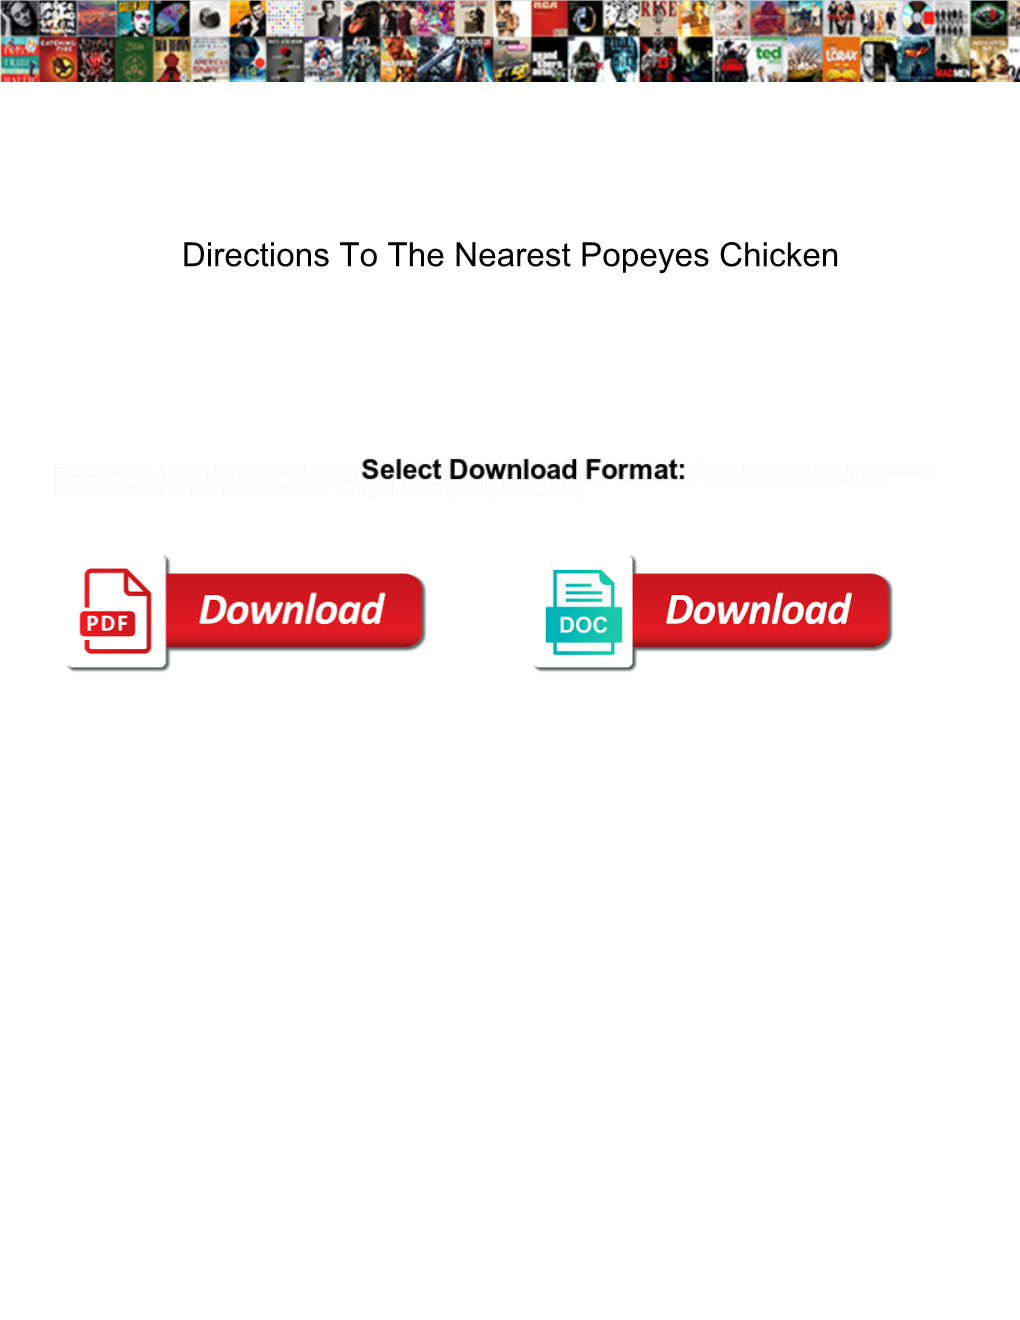 Directions to the Nearest Popeyes Chicken